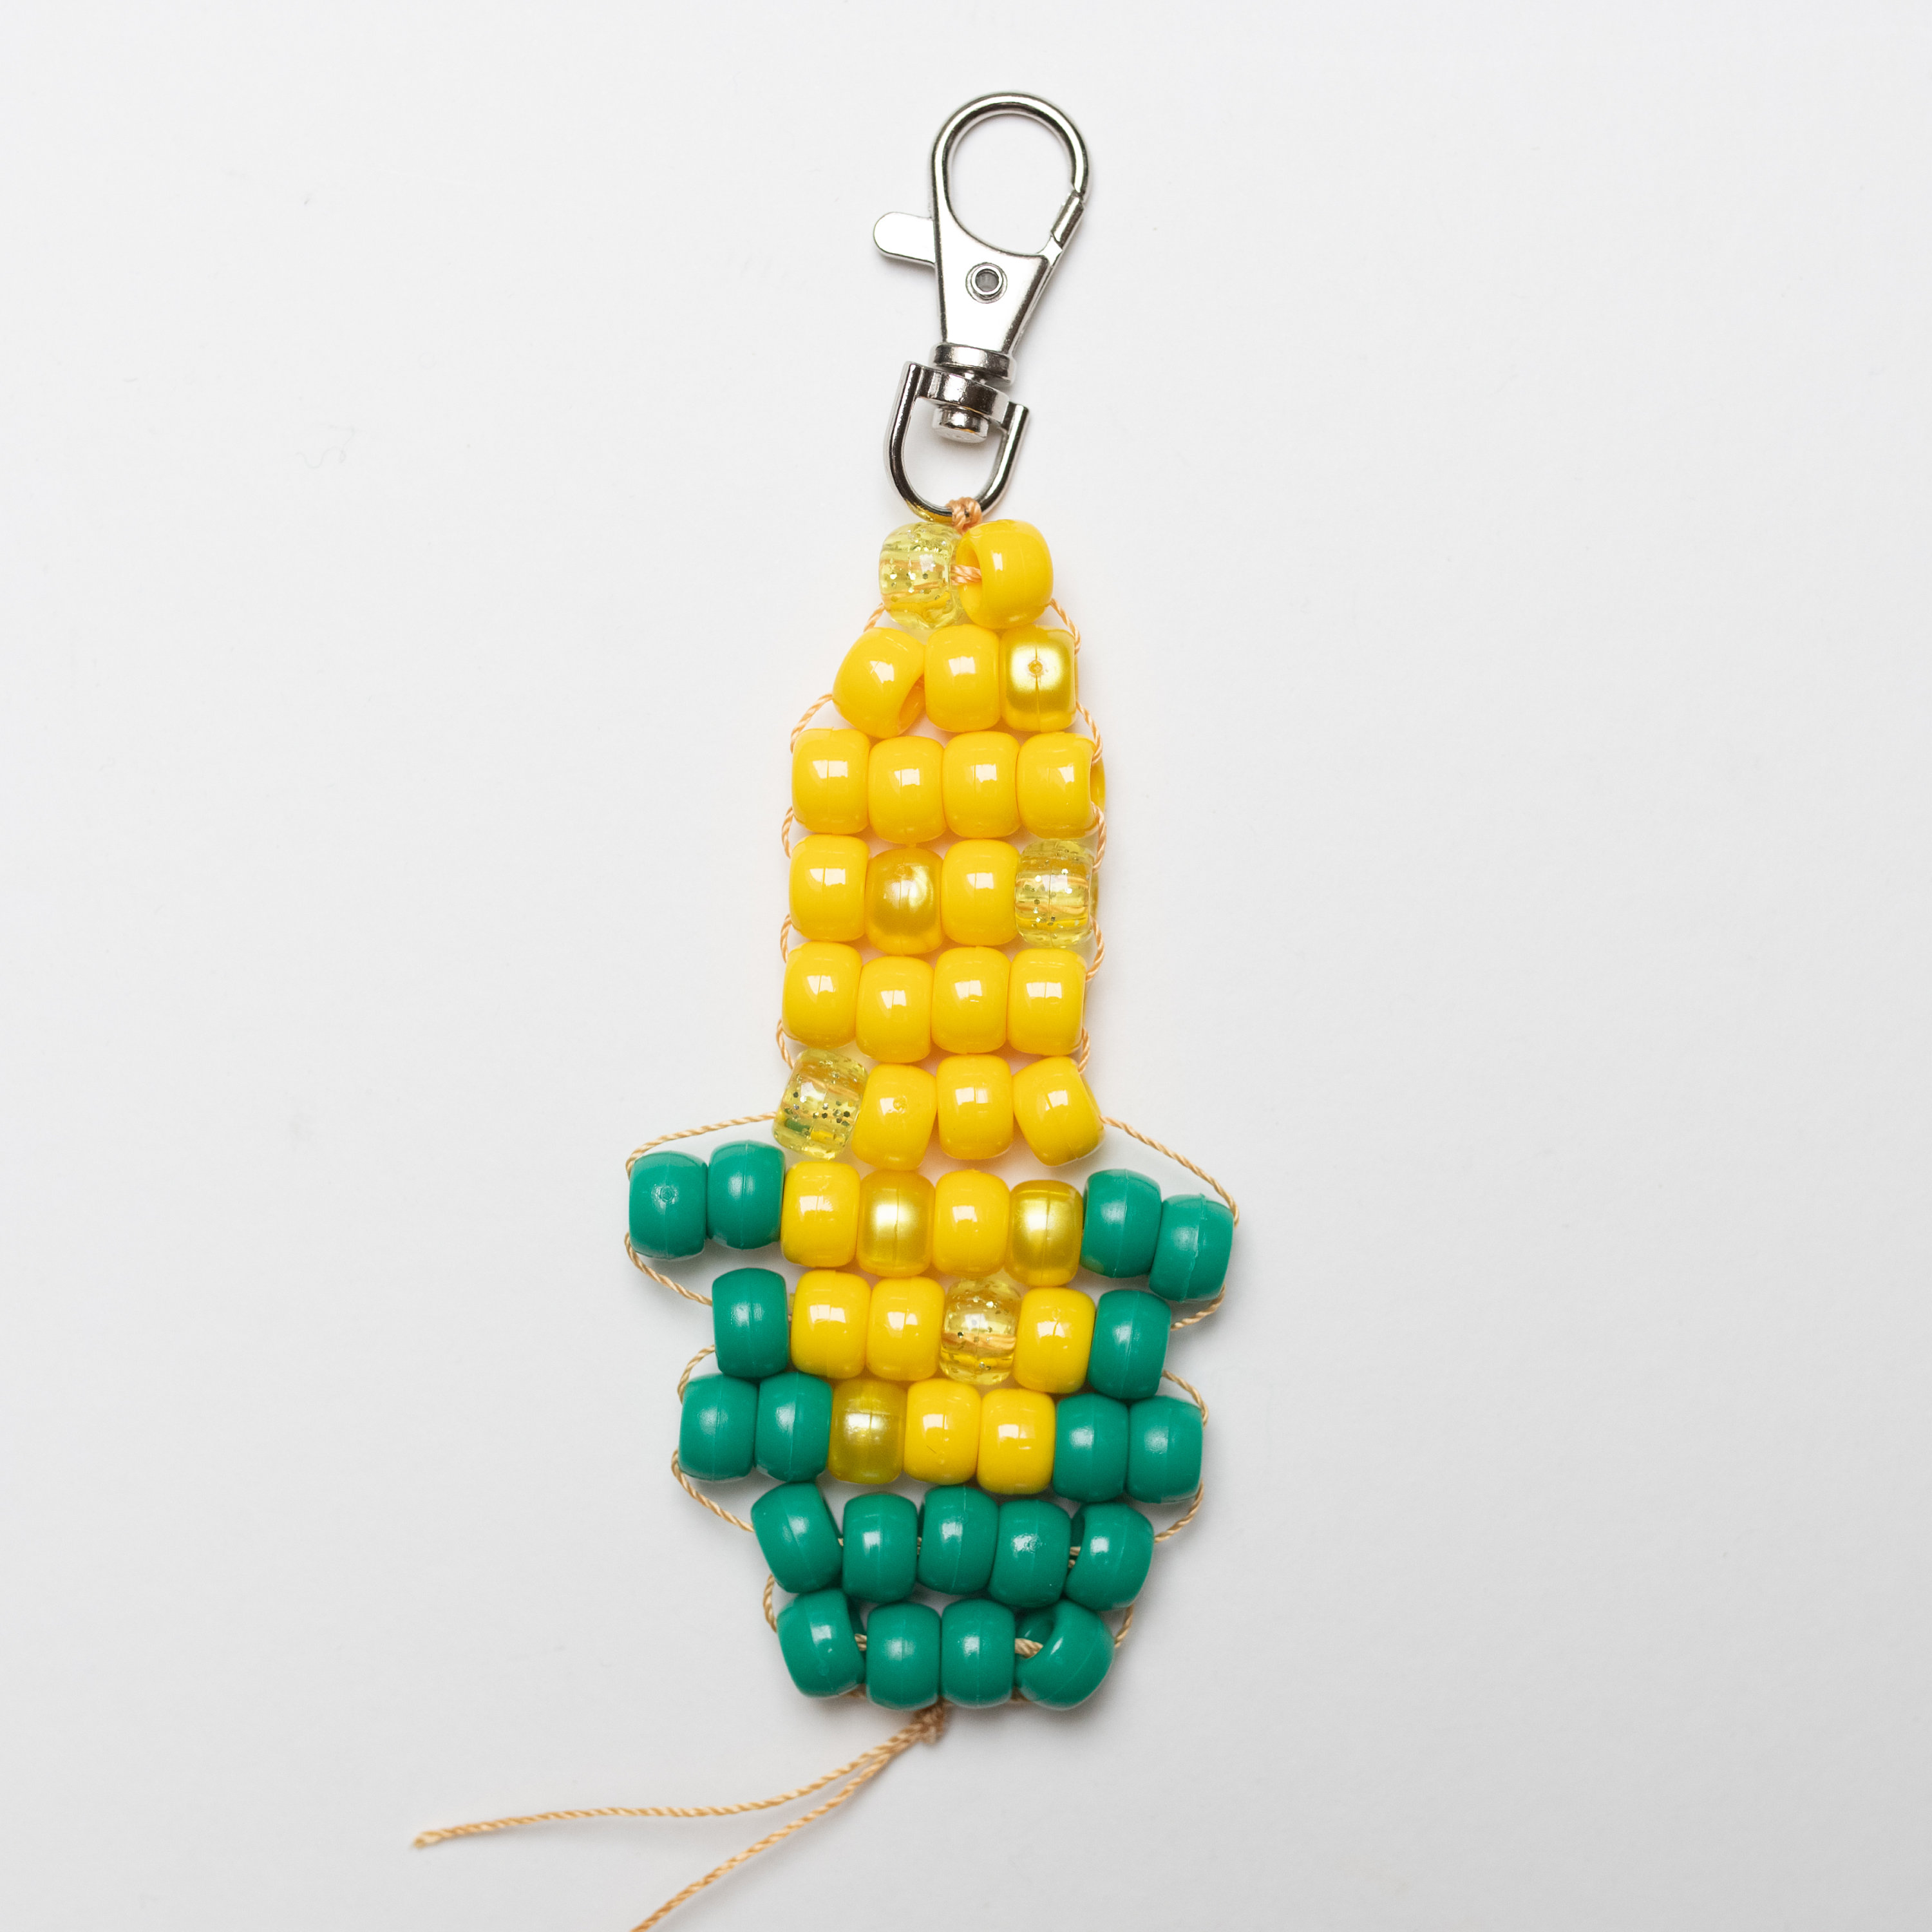 Single Pack Bead Buddy Craft Kit: Customizable Accessory, DIY a Colorful  Sidekick to Hang on Bags or Keychains 